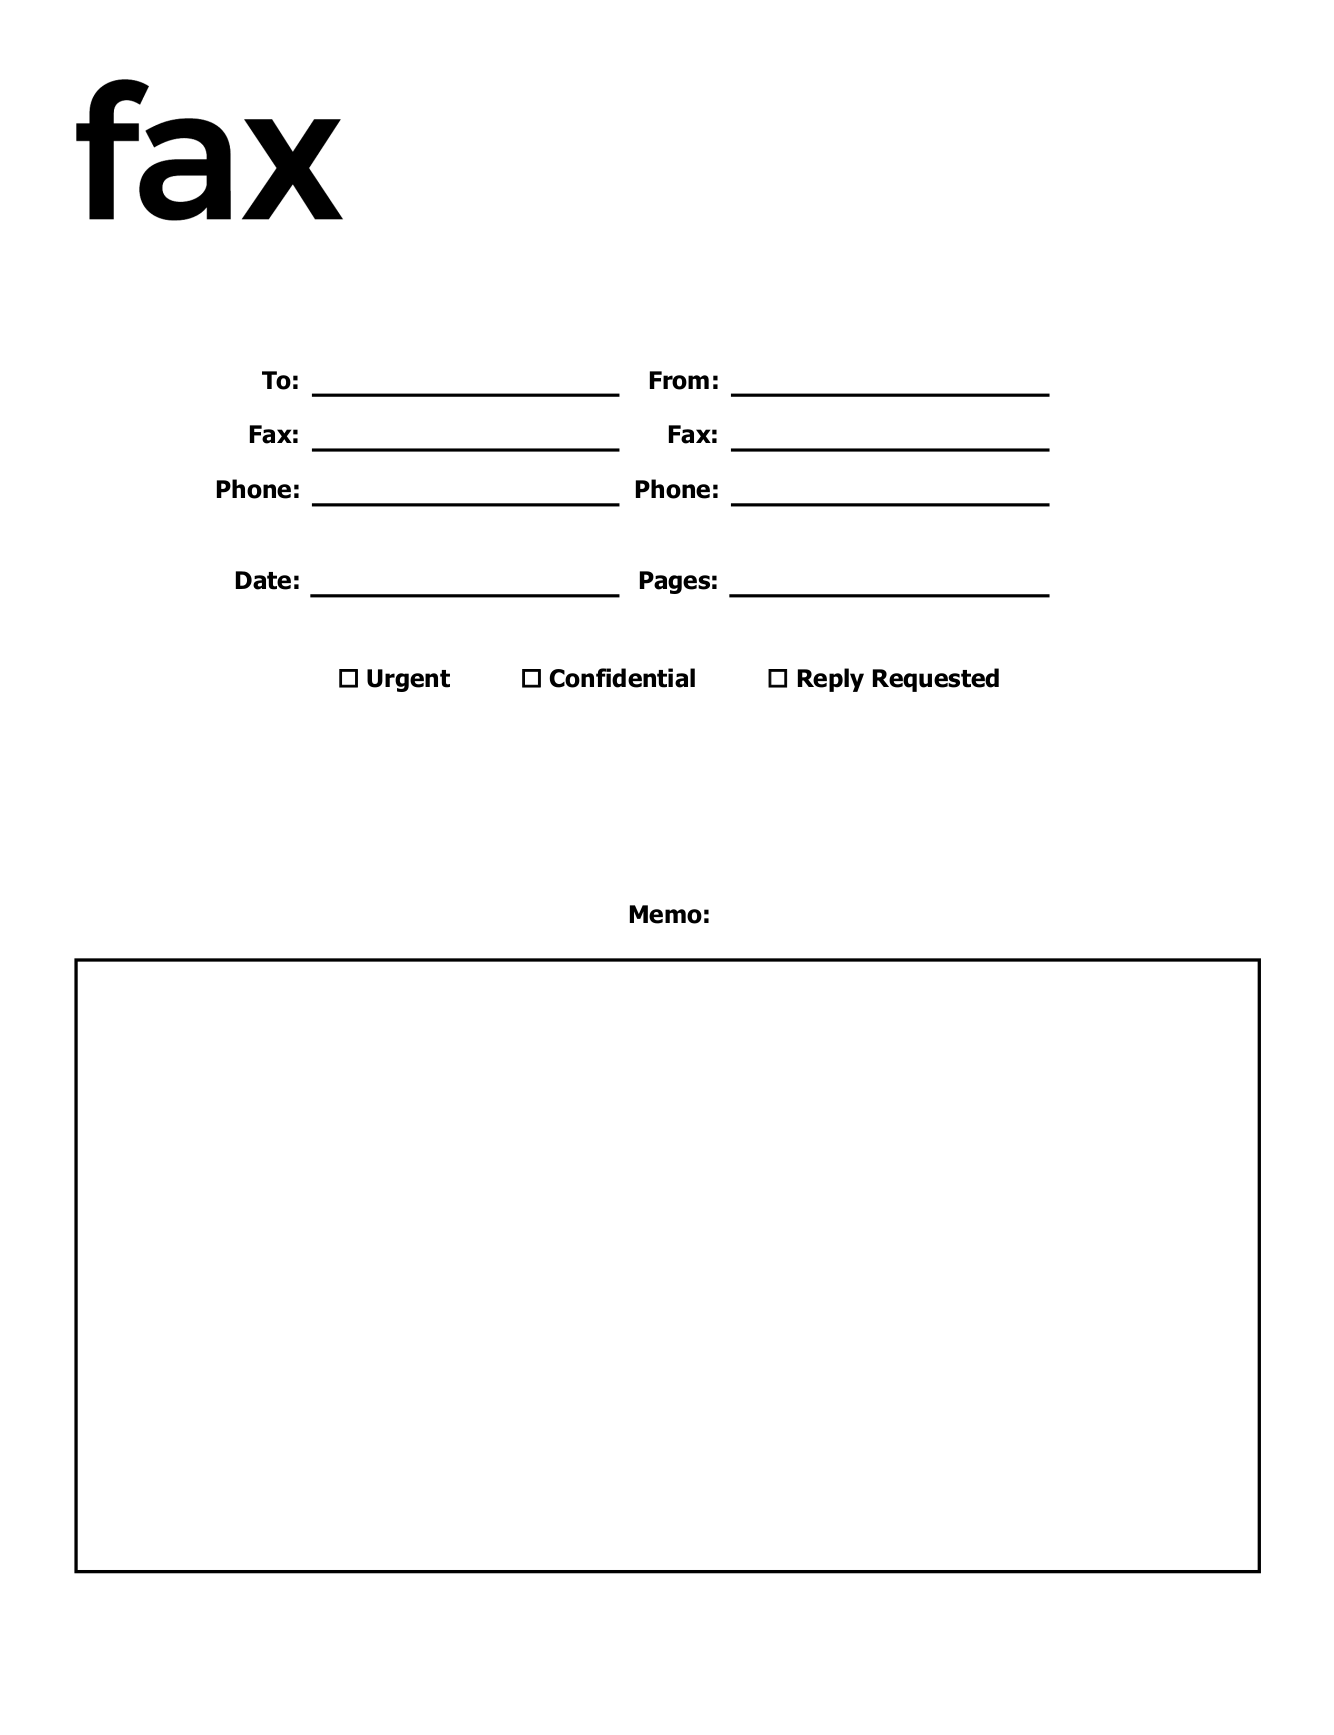 how to do a cover letter for fax